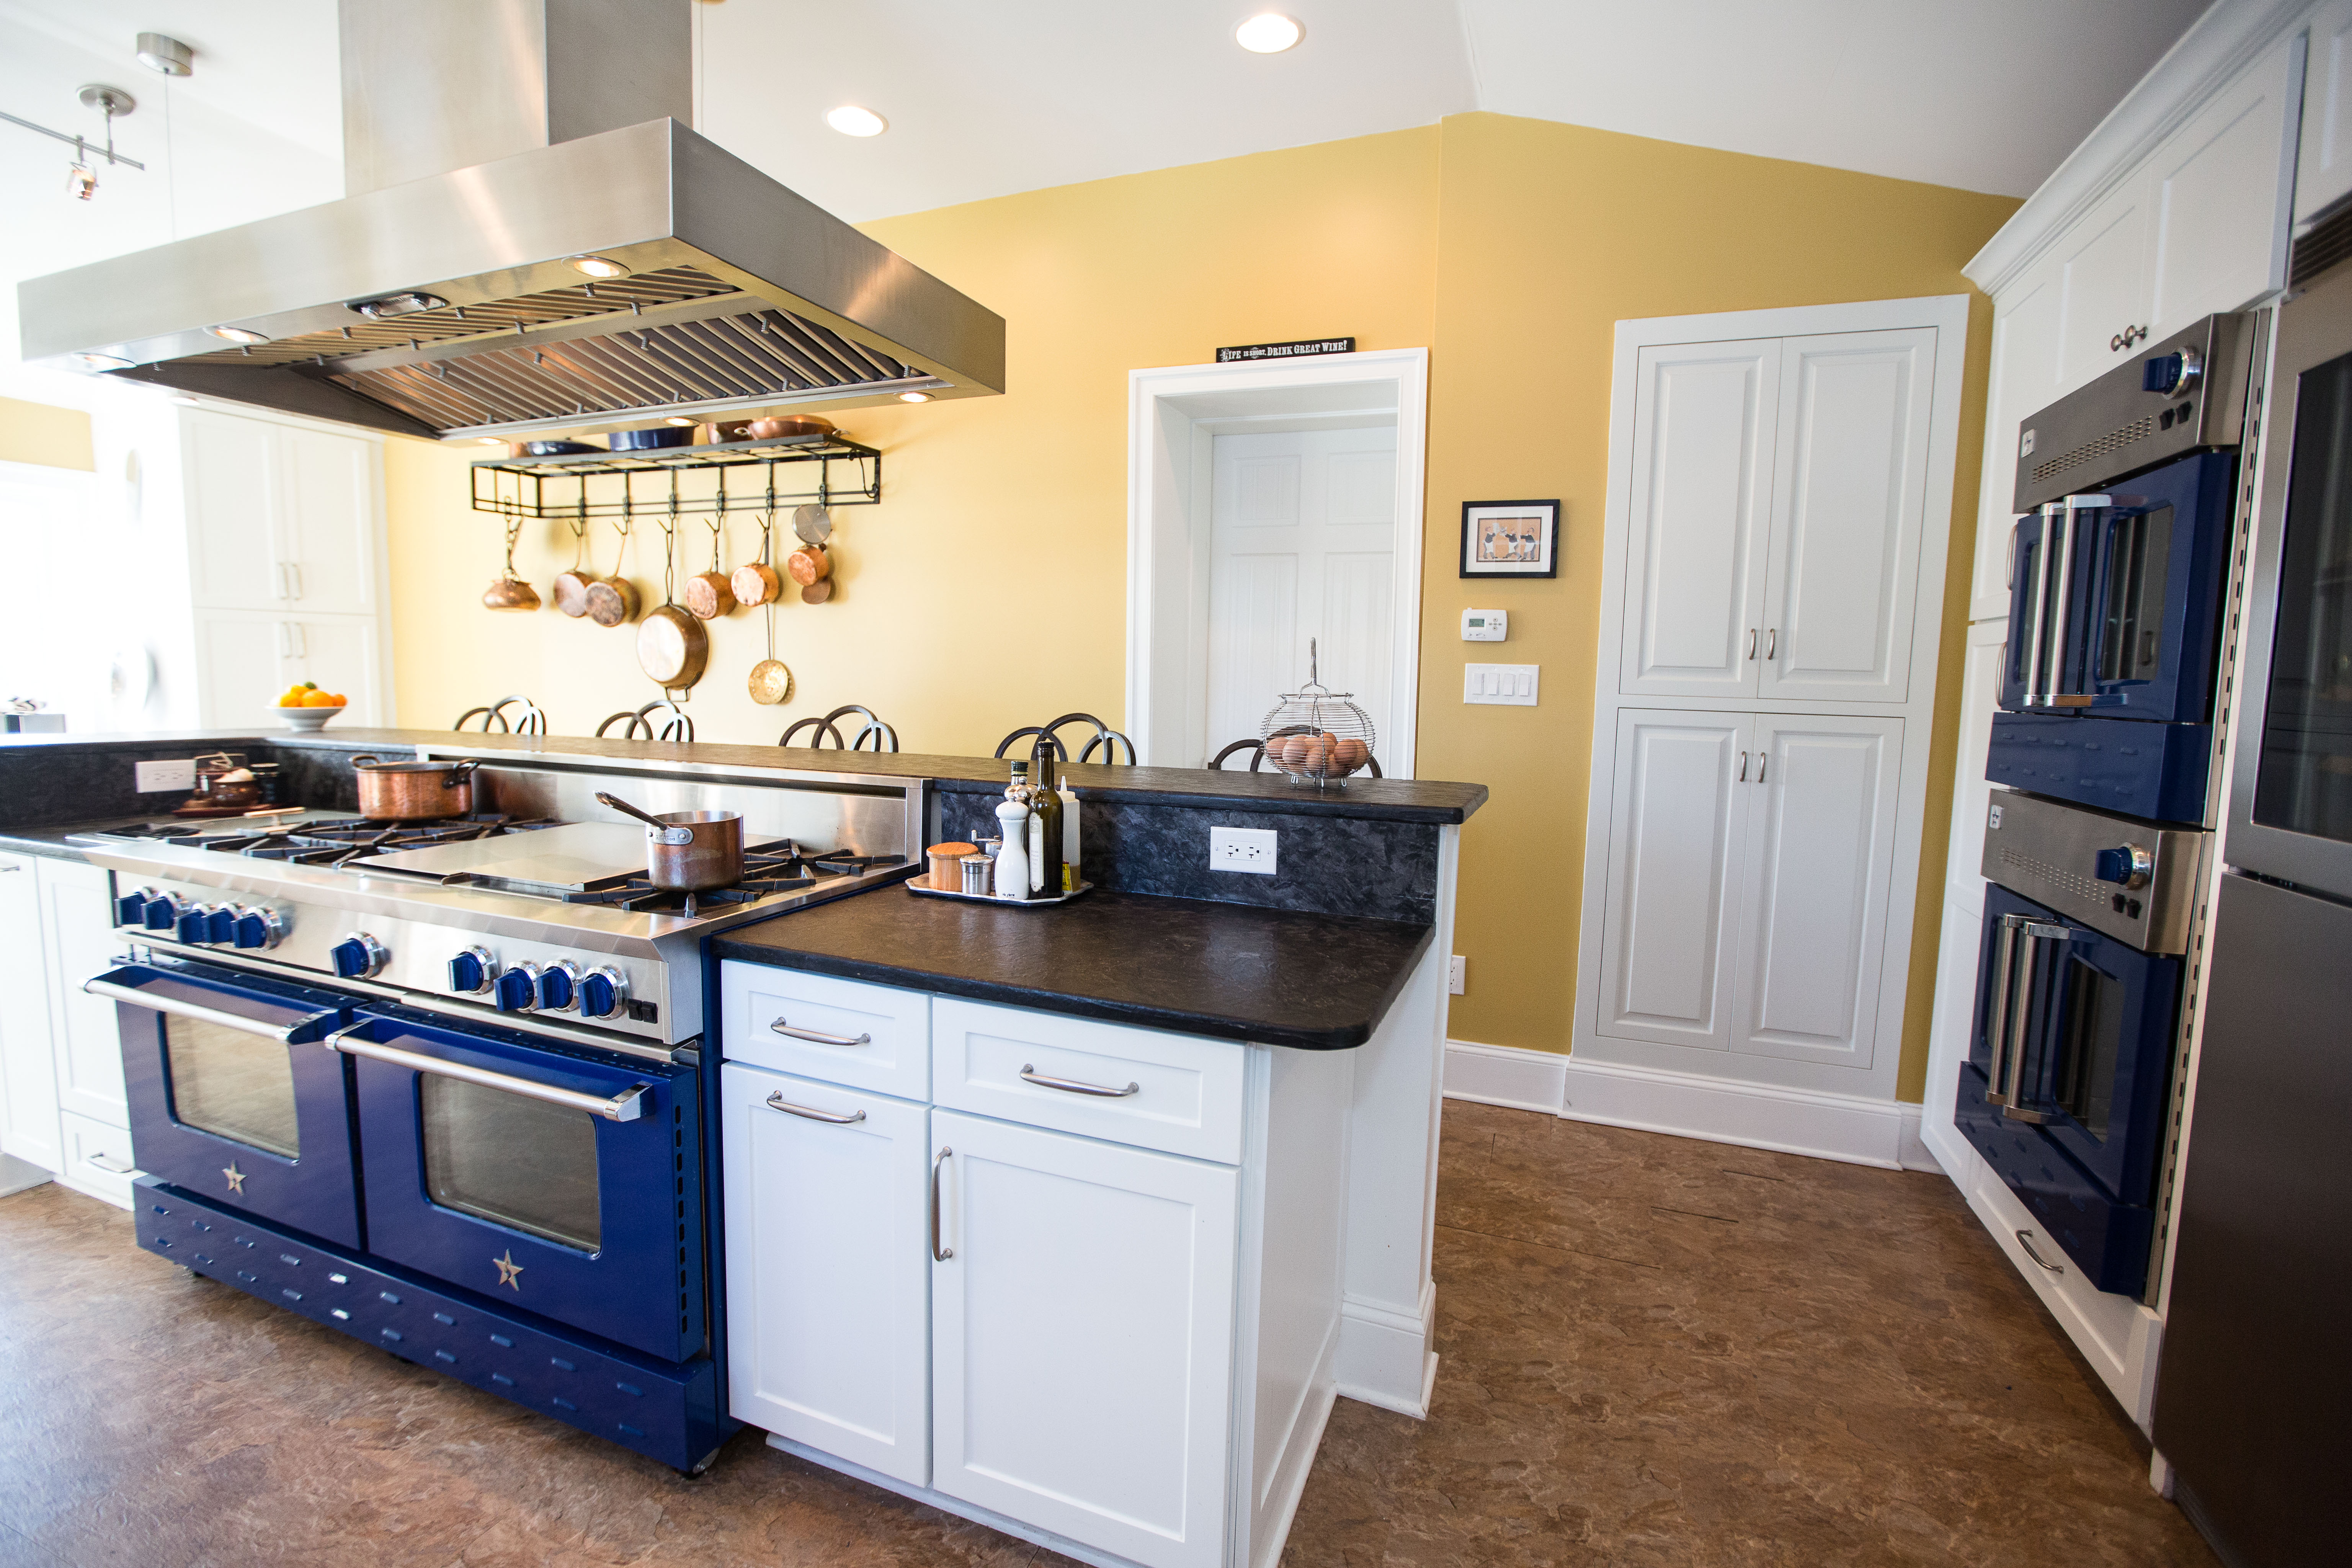 Customizing Your Cooking Experience with BlueStar’s Features